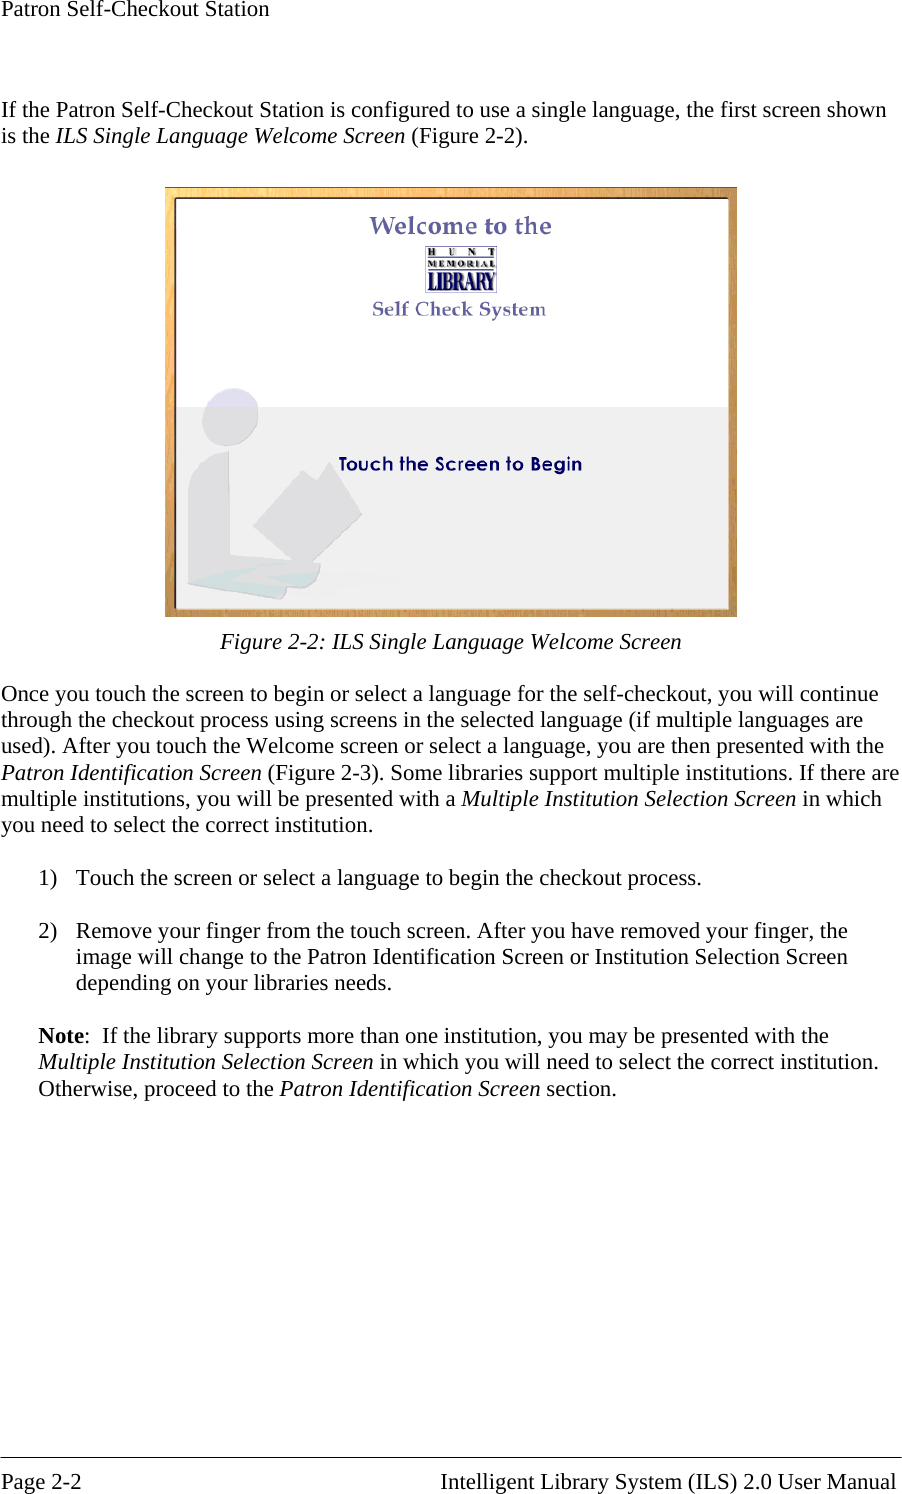 Patron Self-Checkout Station  If the Patron Self-Checkout Station is configured to use a single language, the first screen shown is the ILS Single Language Welcome Screen (Figure 2-2).   Figure 2-2: ILS Single Language Welcome Screen e you touch the screen to begin or select a language for the self-cOnc heckout, you will continue through the checkout process using screens in the selected language (if multiple languages are used). After you touch the Welcome screen or select a language, you are then presented with the Patron Identification Screen (Figure 2-3). Some libraries support multiple institutions. If there are multiple institutions, you will be presented with a Multiple Institution Selection Screen in which you need to select the correct institution.  1)  Touch the screen or select a language to begin the checkout process.  2)  Remove your finger from the touch screen. After you have removed your finger, the image will change to the Patron Identification Screen or Institution Selection Screen depending on your libraries needs.  Note:  If the library supports more than one institution, you may be presented with the Multiple Institution Selection Screen in which you will need to select the correct institution. Otherwise, proceed to the Patron Identification Screen section.  Page 2-2                                                       Intelligent Library System (ILS) 2.0 User Manual 